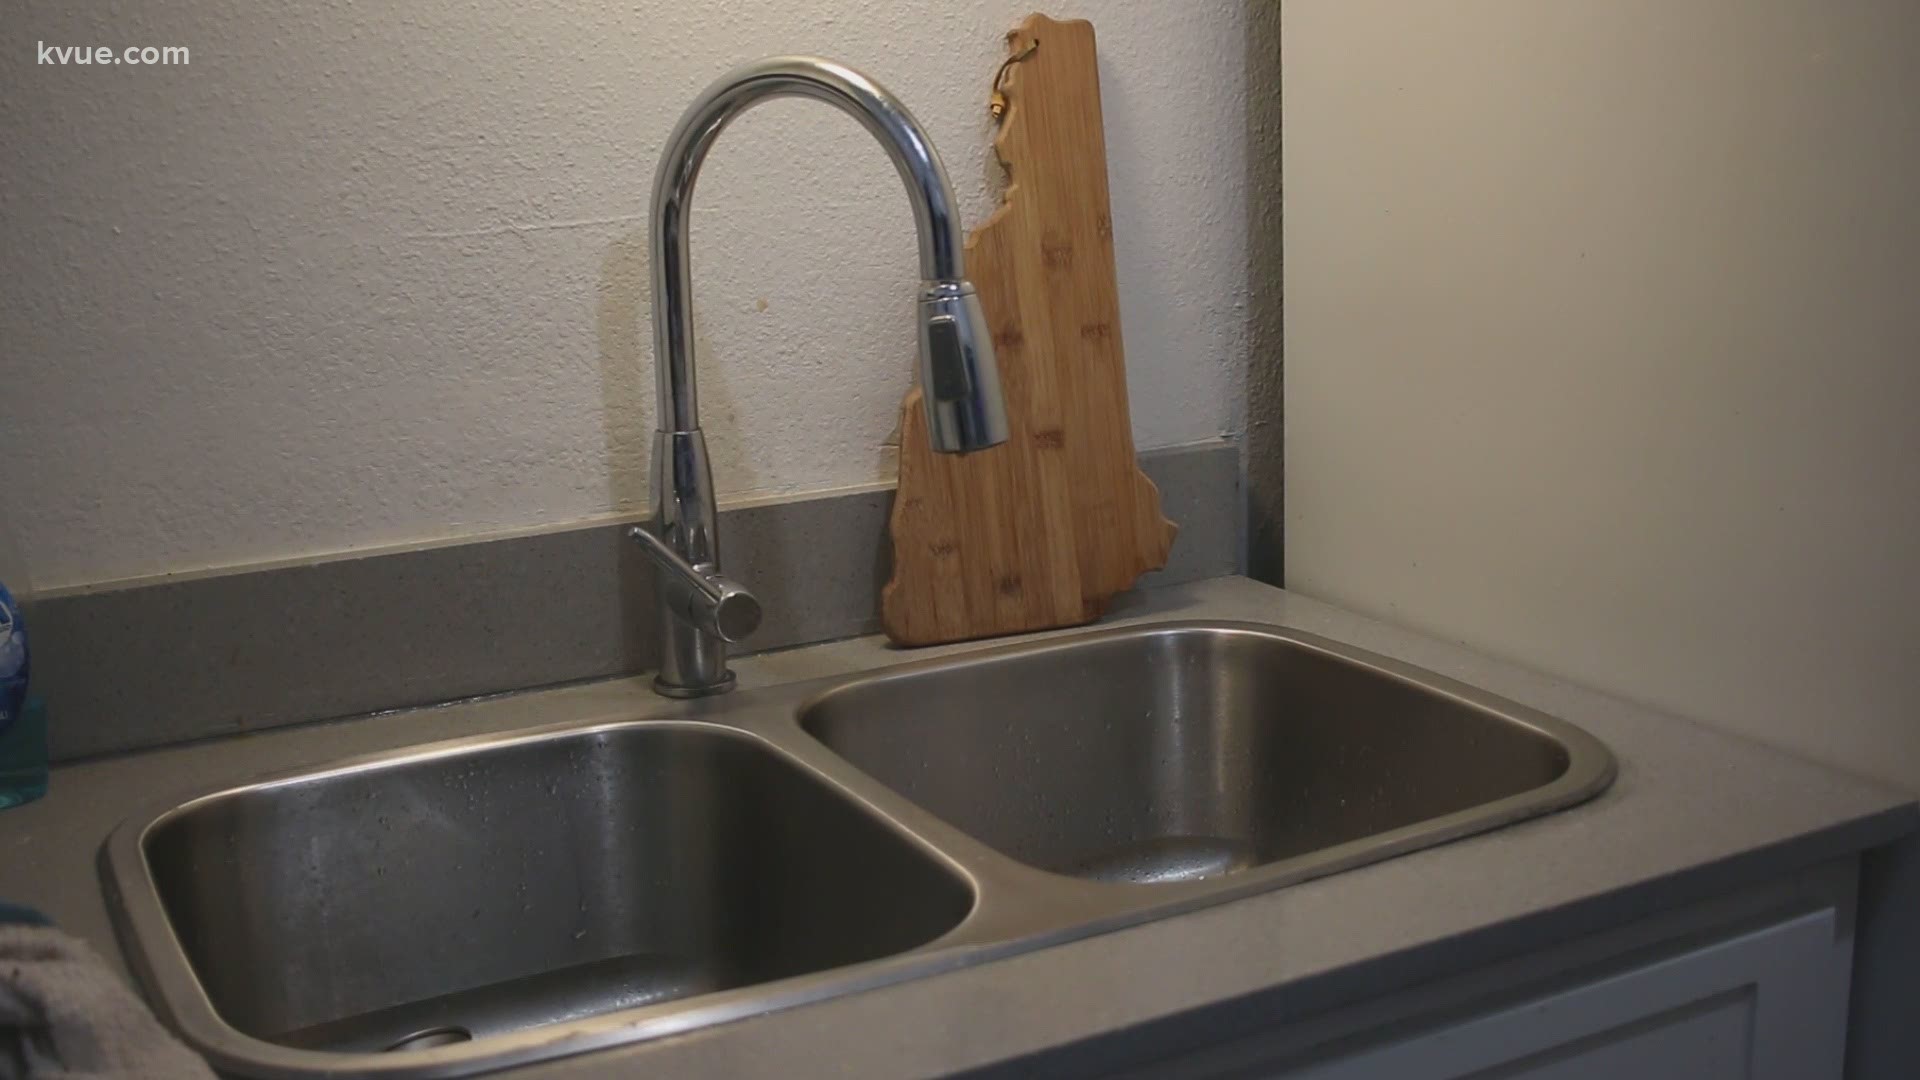 The city-wide boil water notice for Austin is just adding to problems for so many folks who are without electricity and water. Austin Water has 900,000 customers.